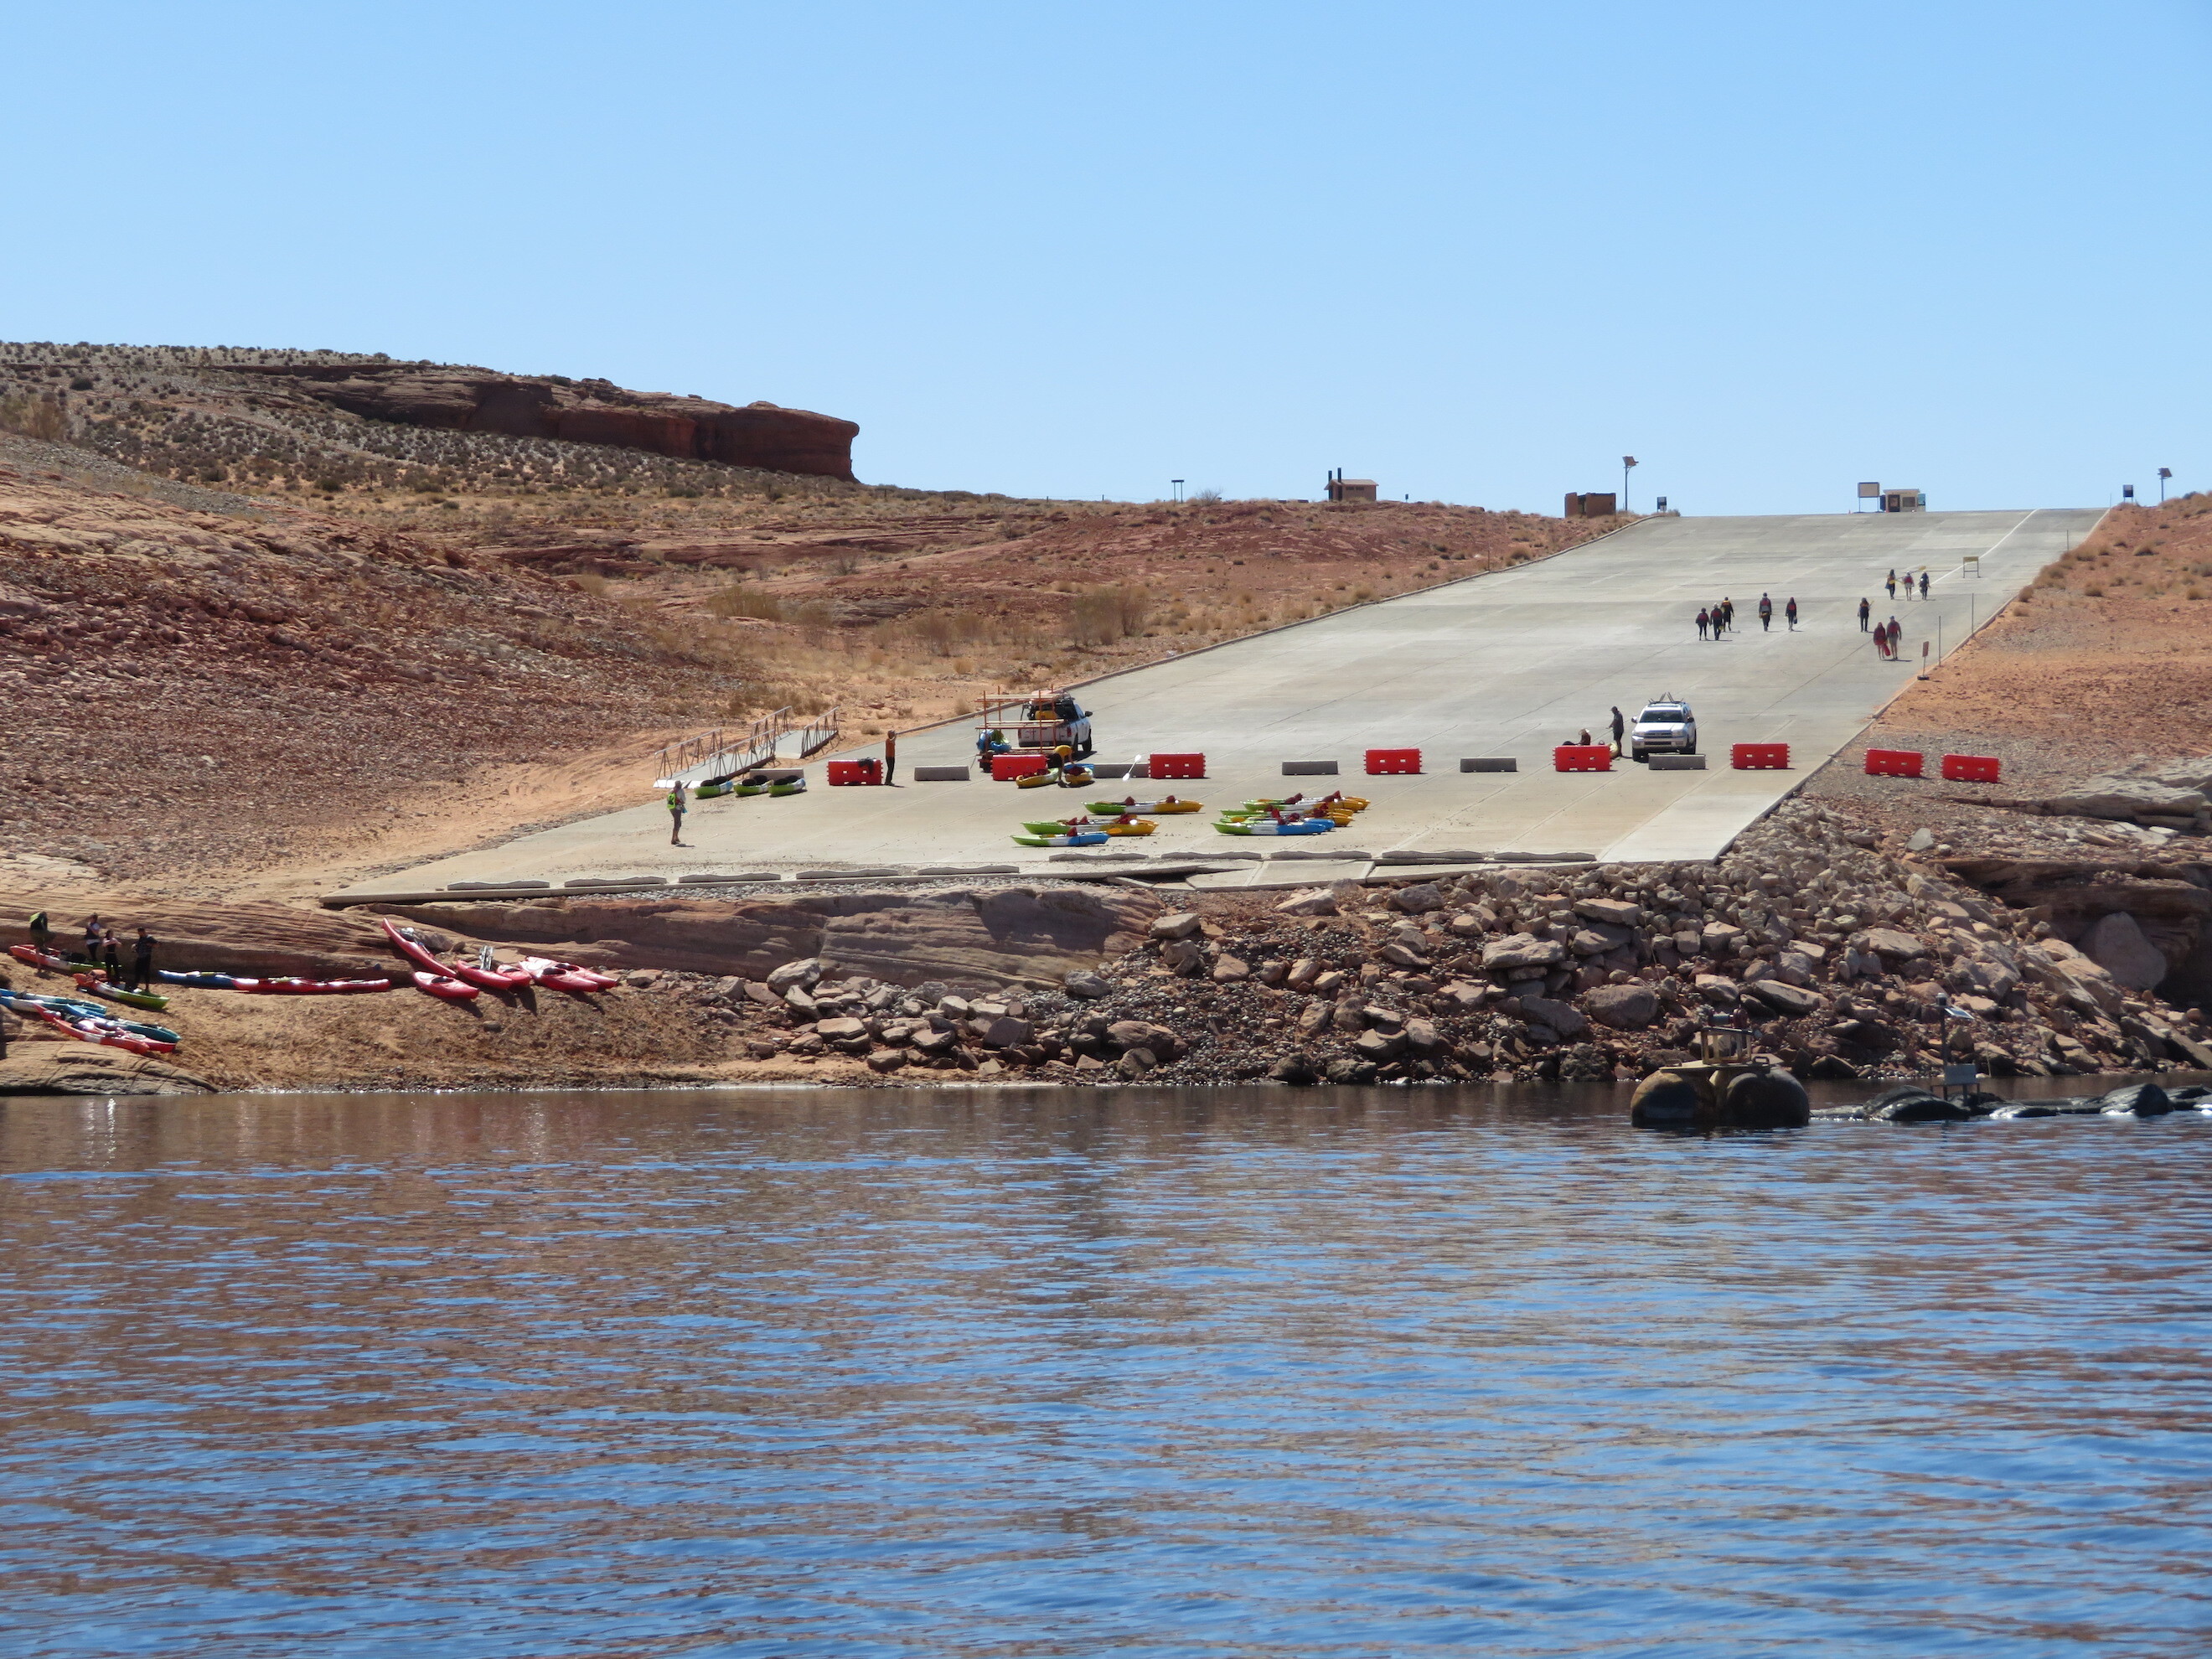 Trucks unloading kayaks on a barricaded launch ramp as visitors descend a rocky shoreline. 